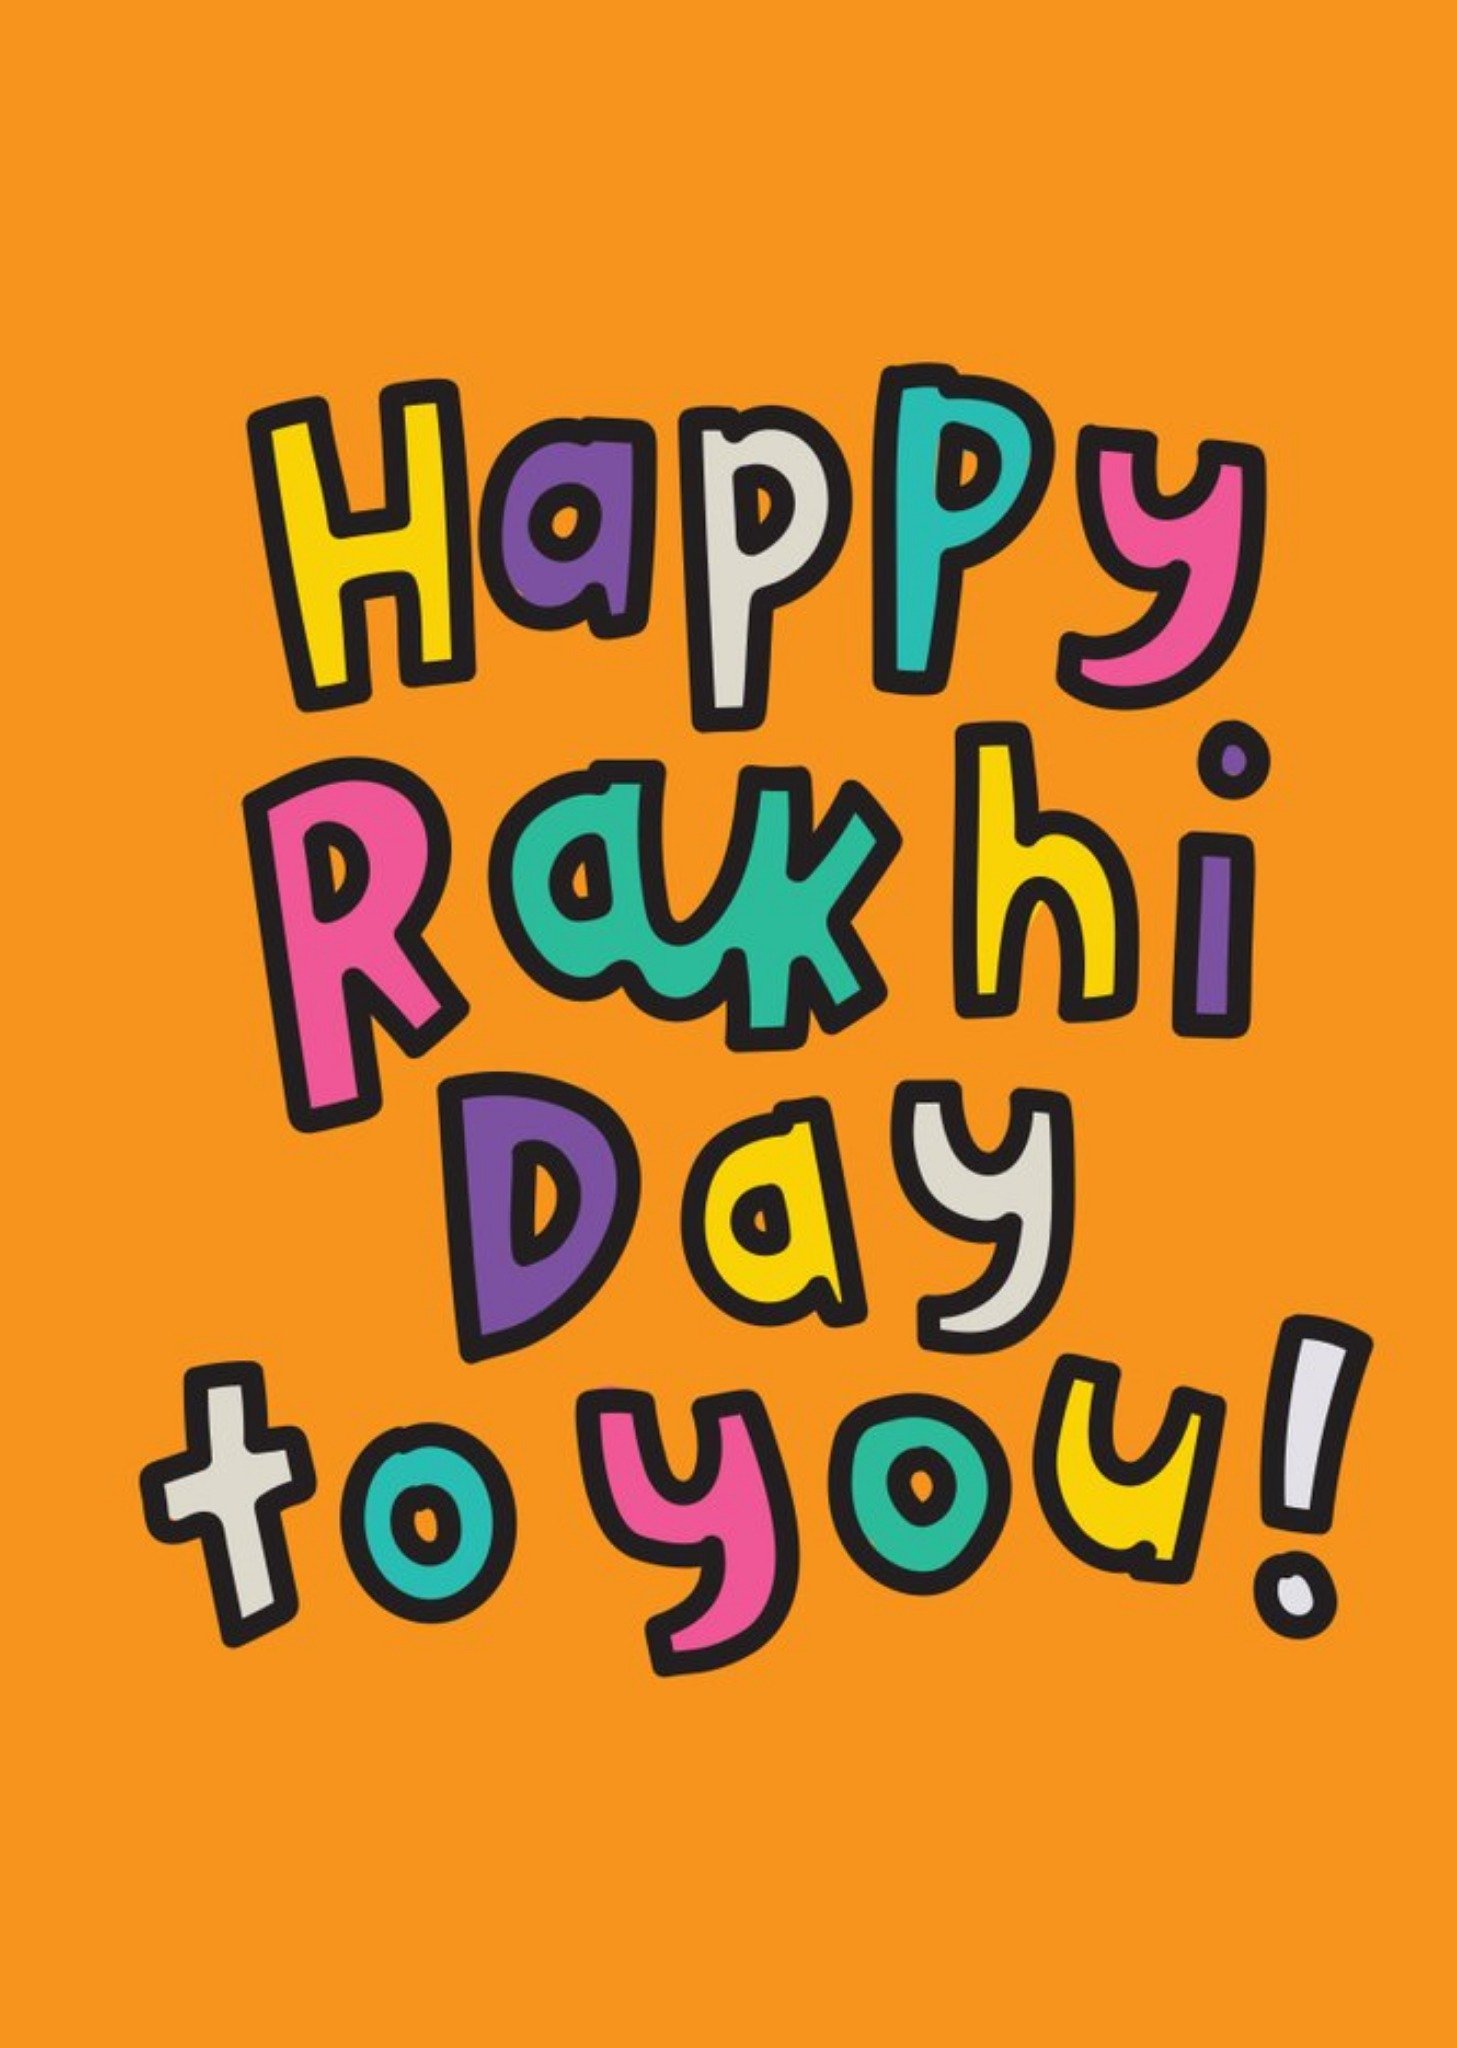 Moonpig The Playful Indian Bright Typographic Happy Rakhi Day To You Card, Large